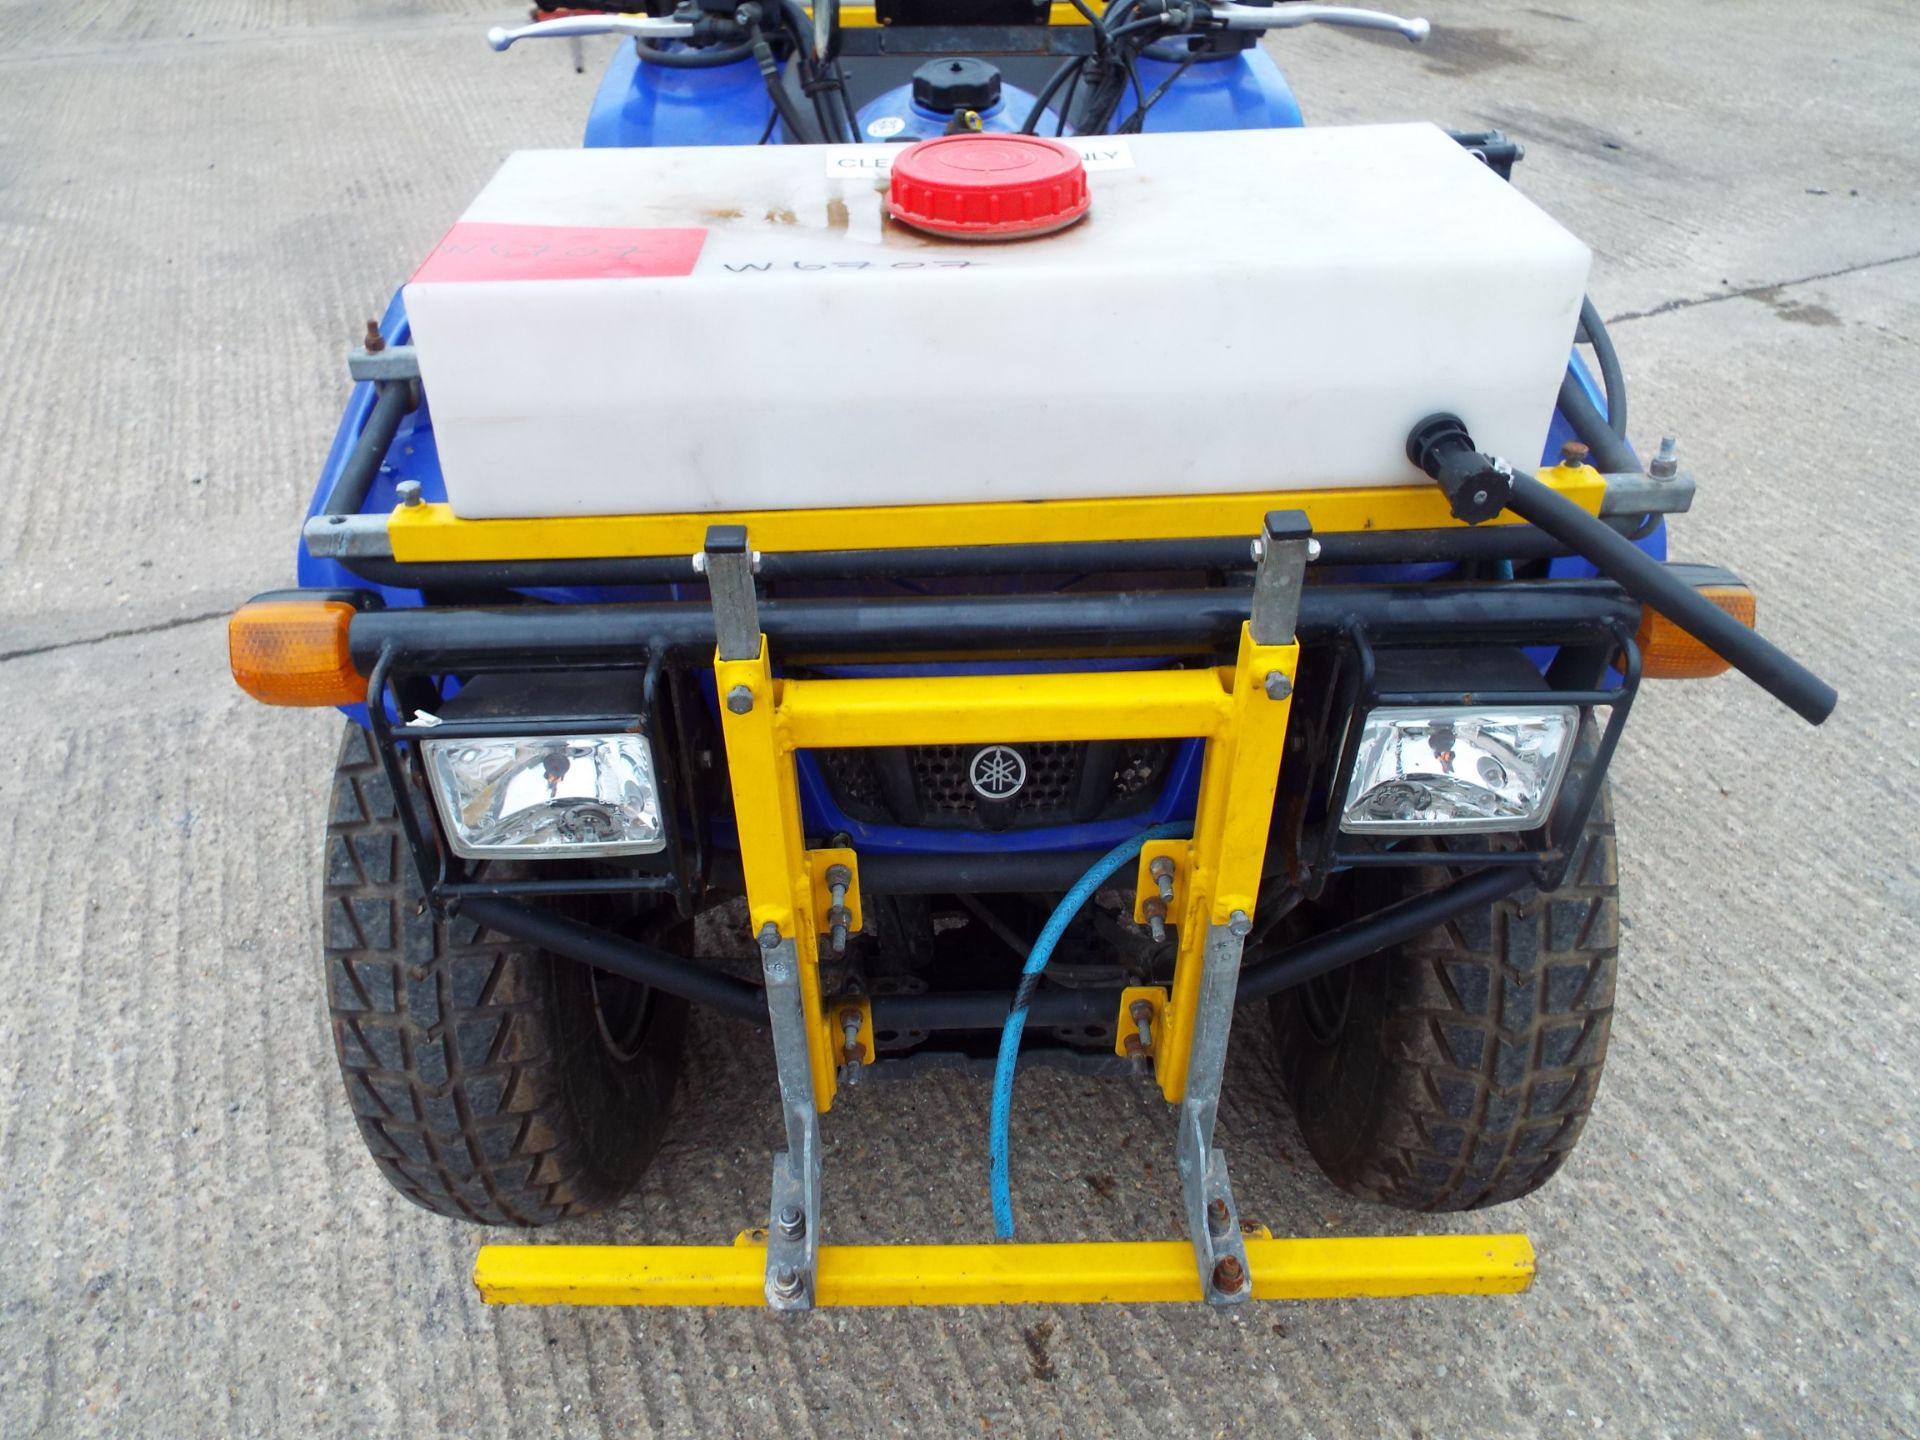 2008 Yamaha Grizzly 350 Ultramatic Quad Bike fitted with Vale Front/Rear Spraying Equipment - Bild 16 aus 26